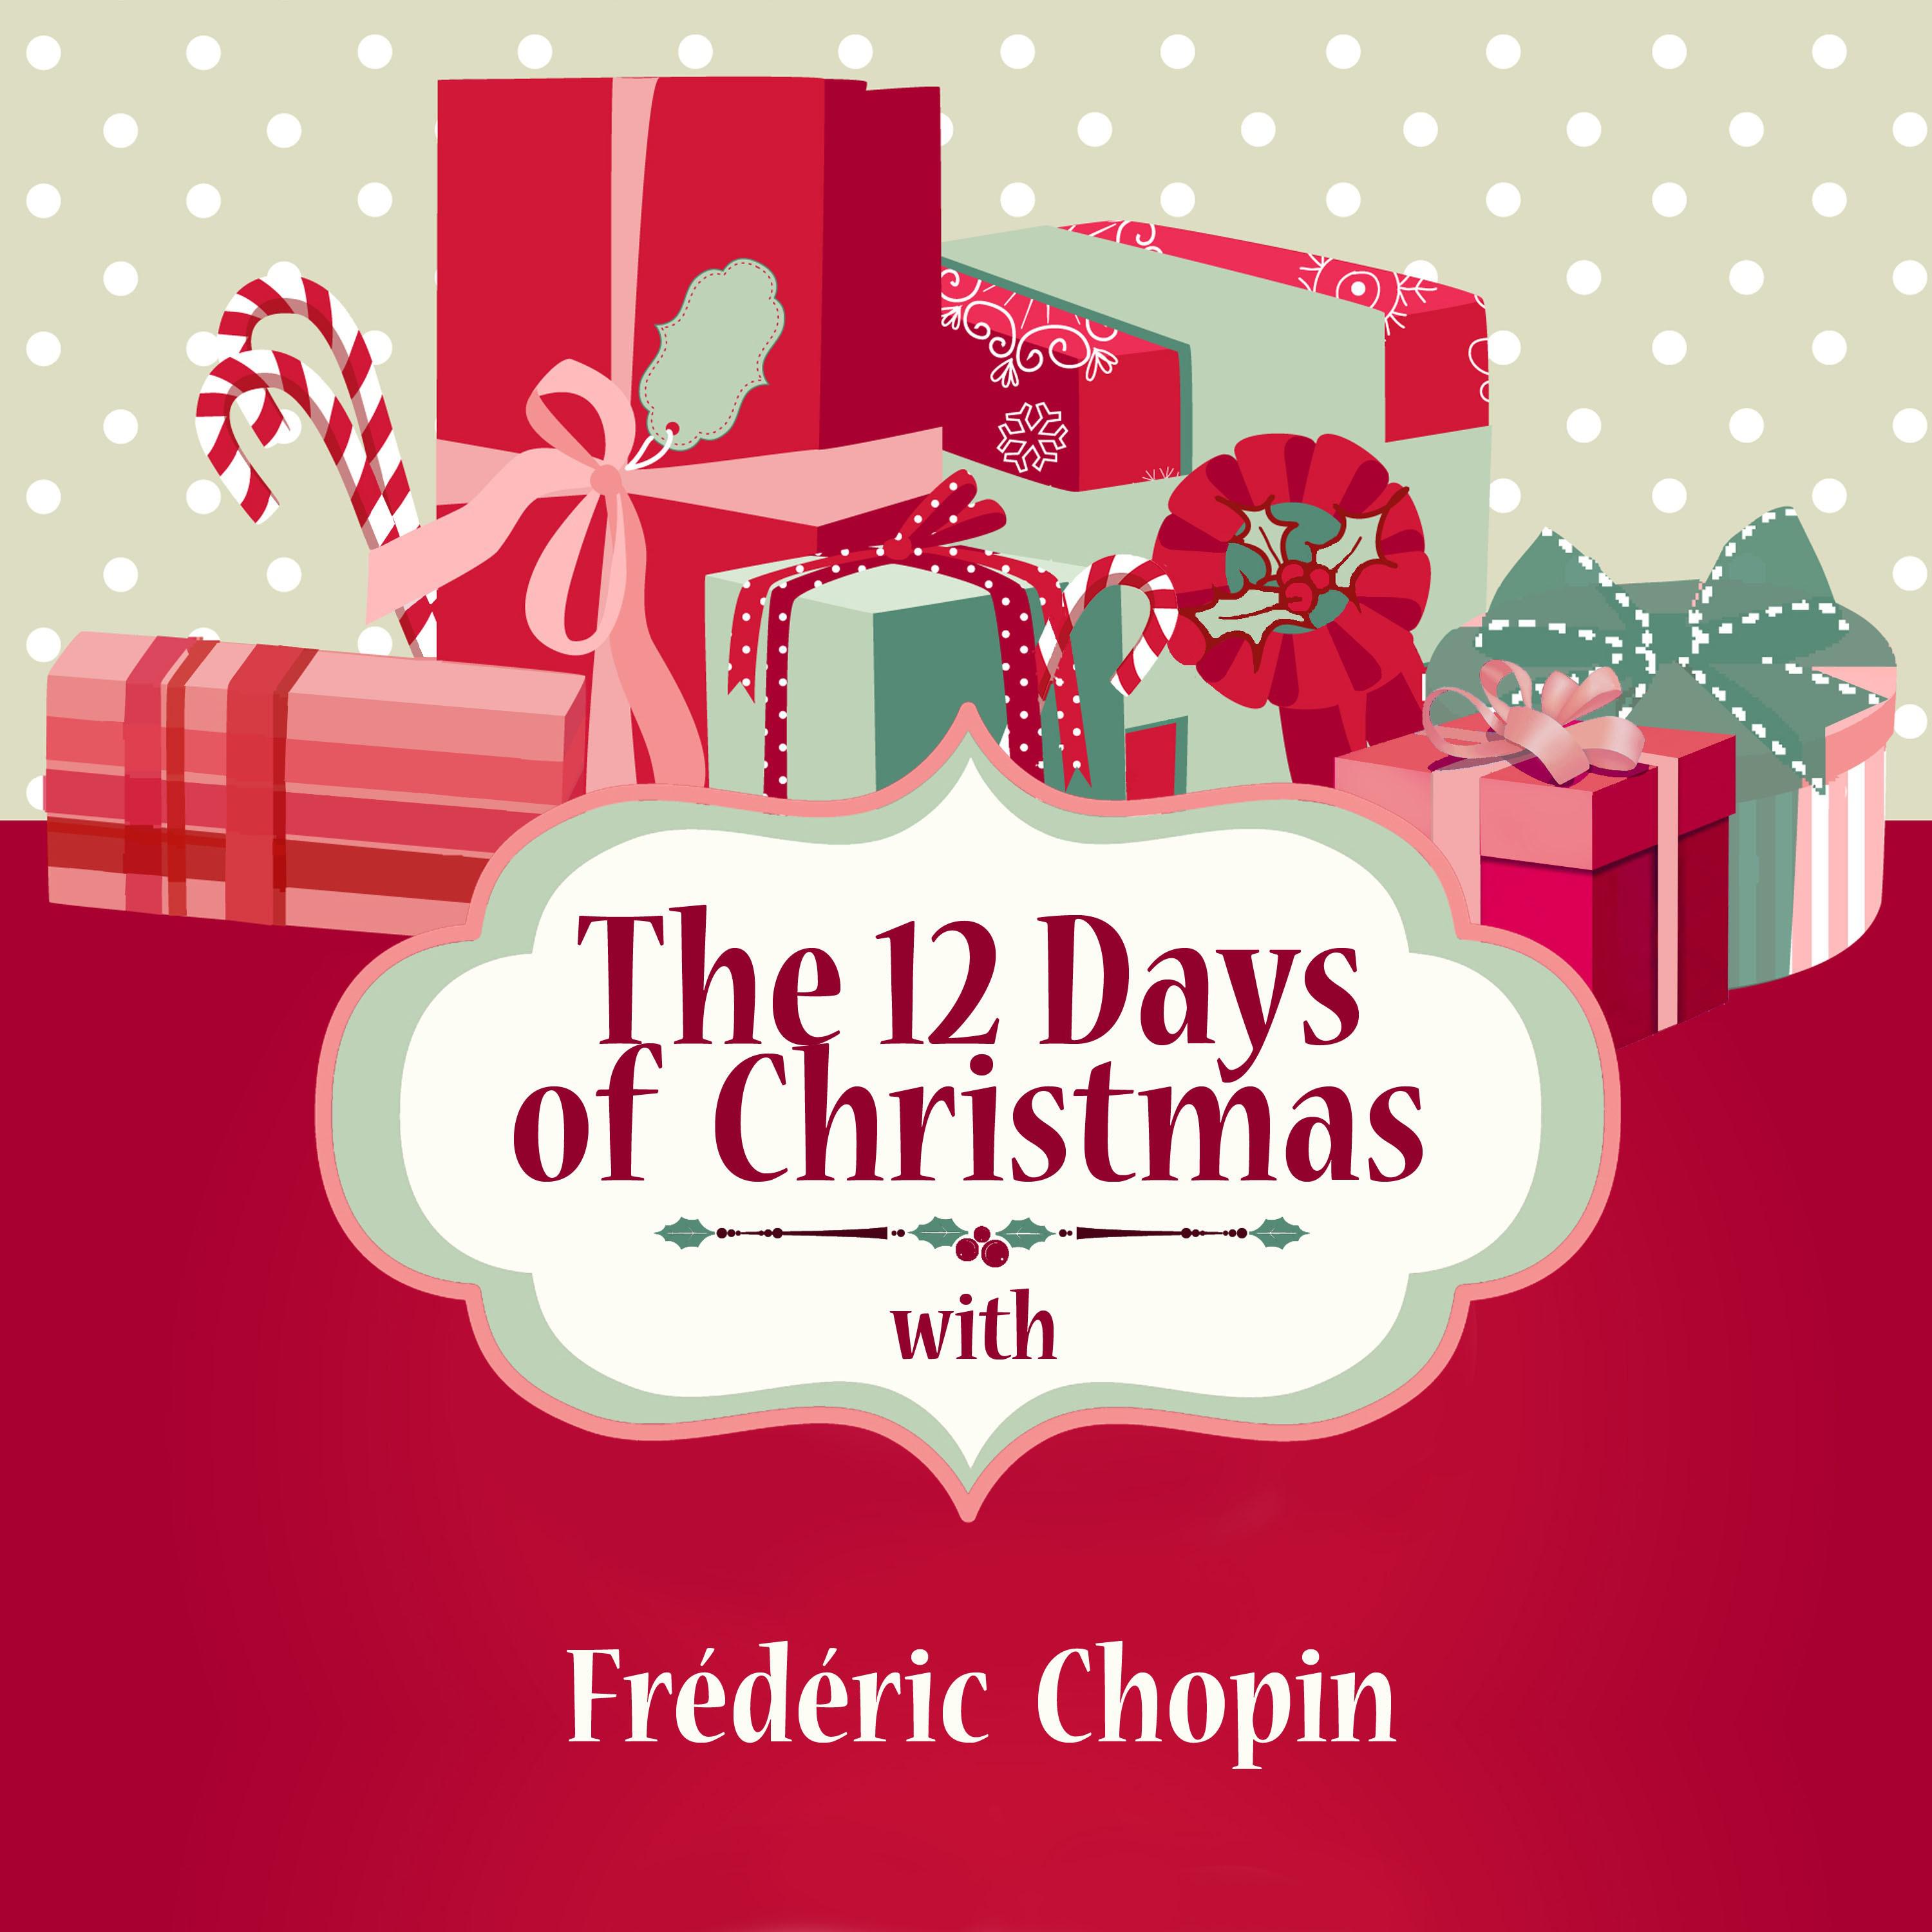 The 12 Days of Christmas with Frédéric Chopin